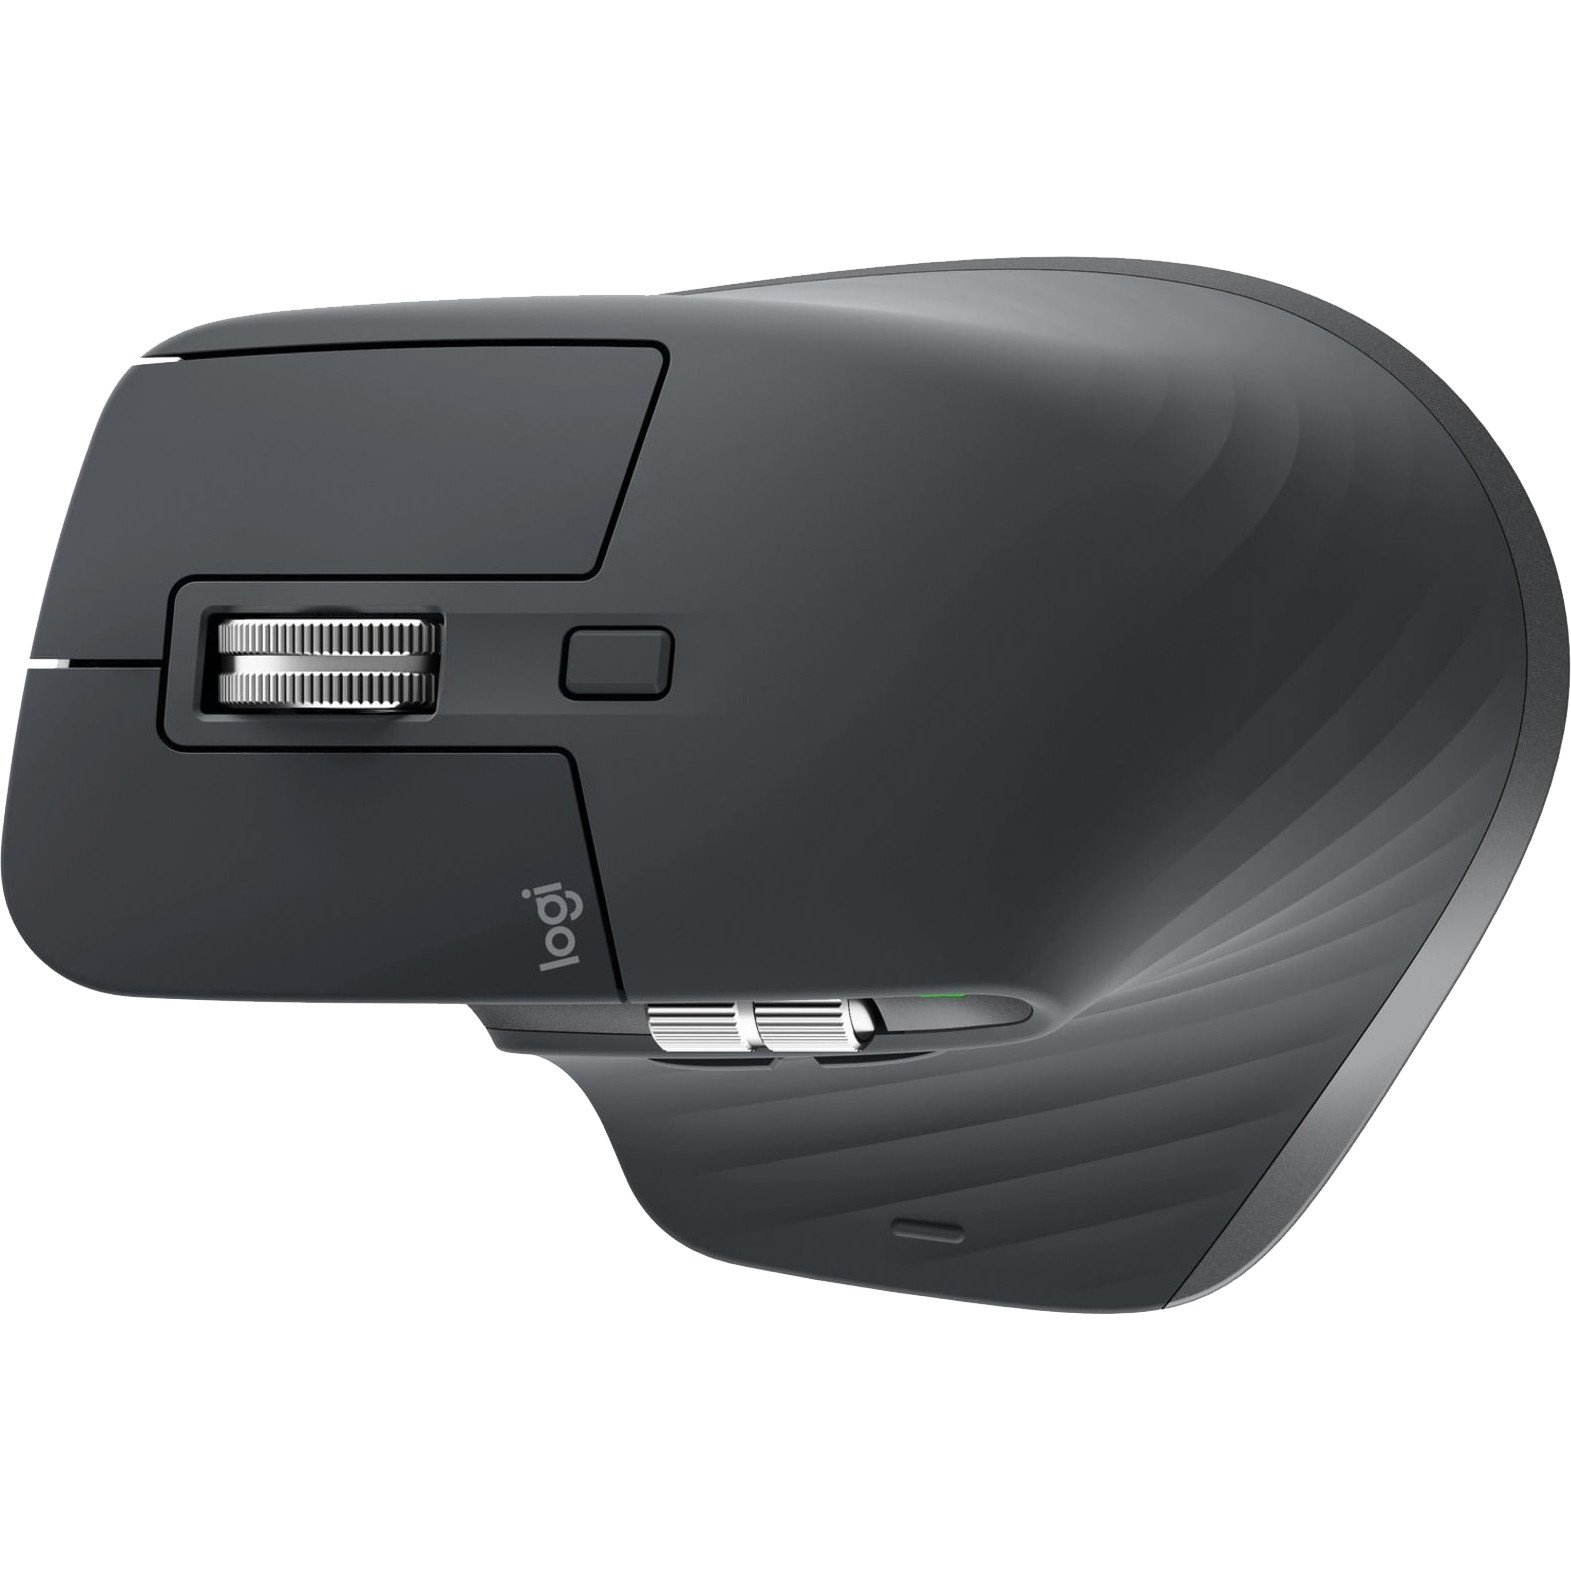 MX Master 3 Wireless Mouse